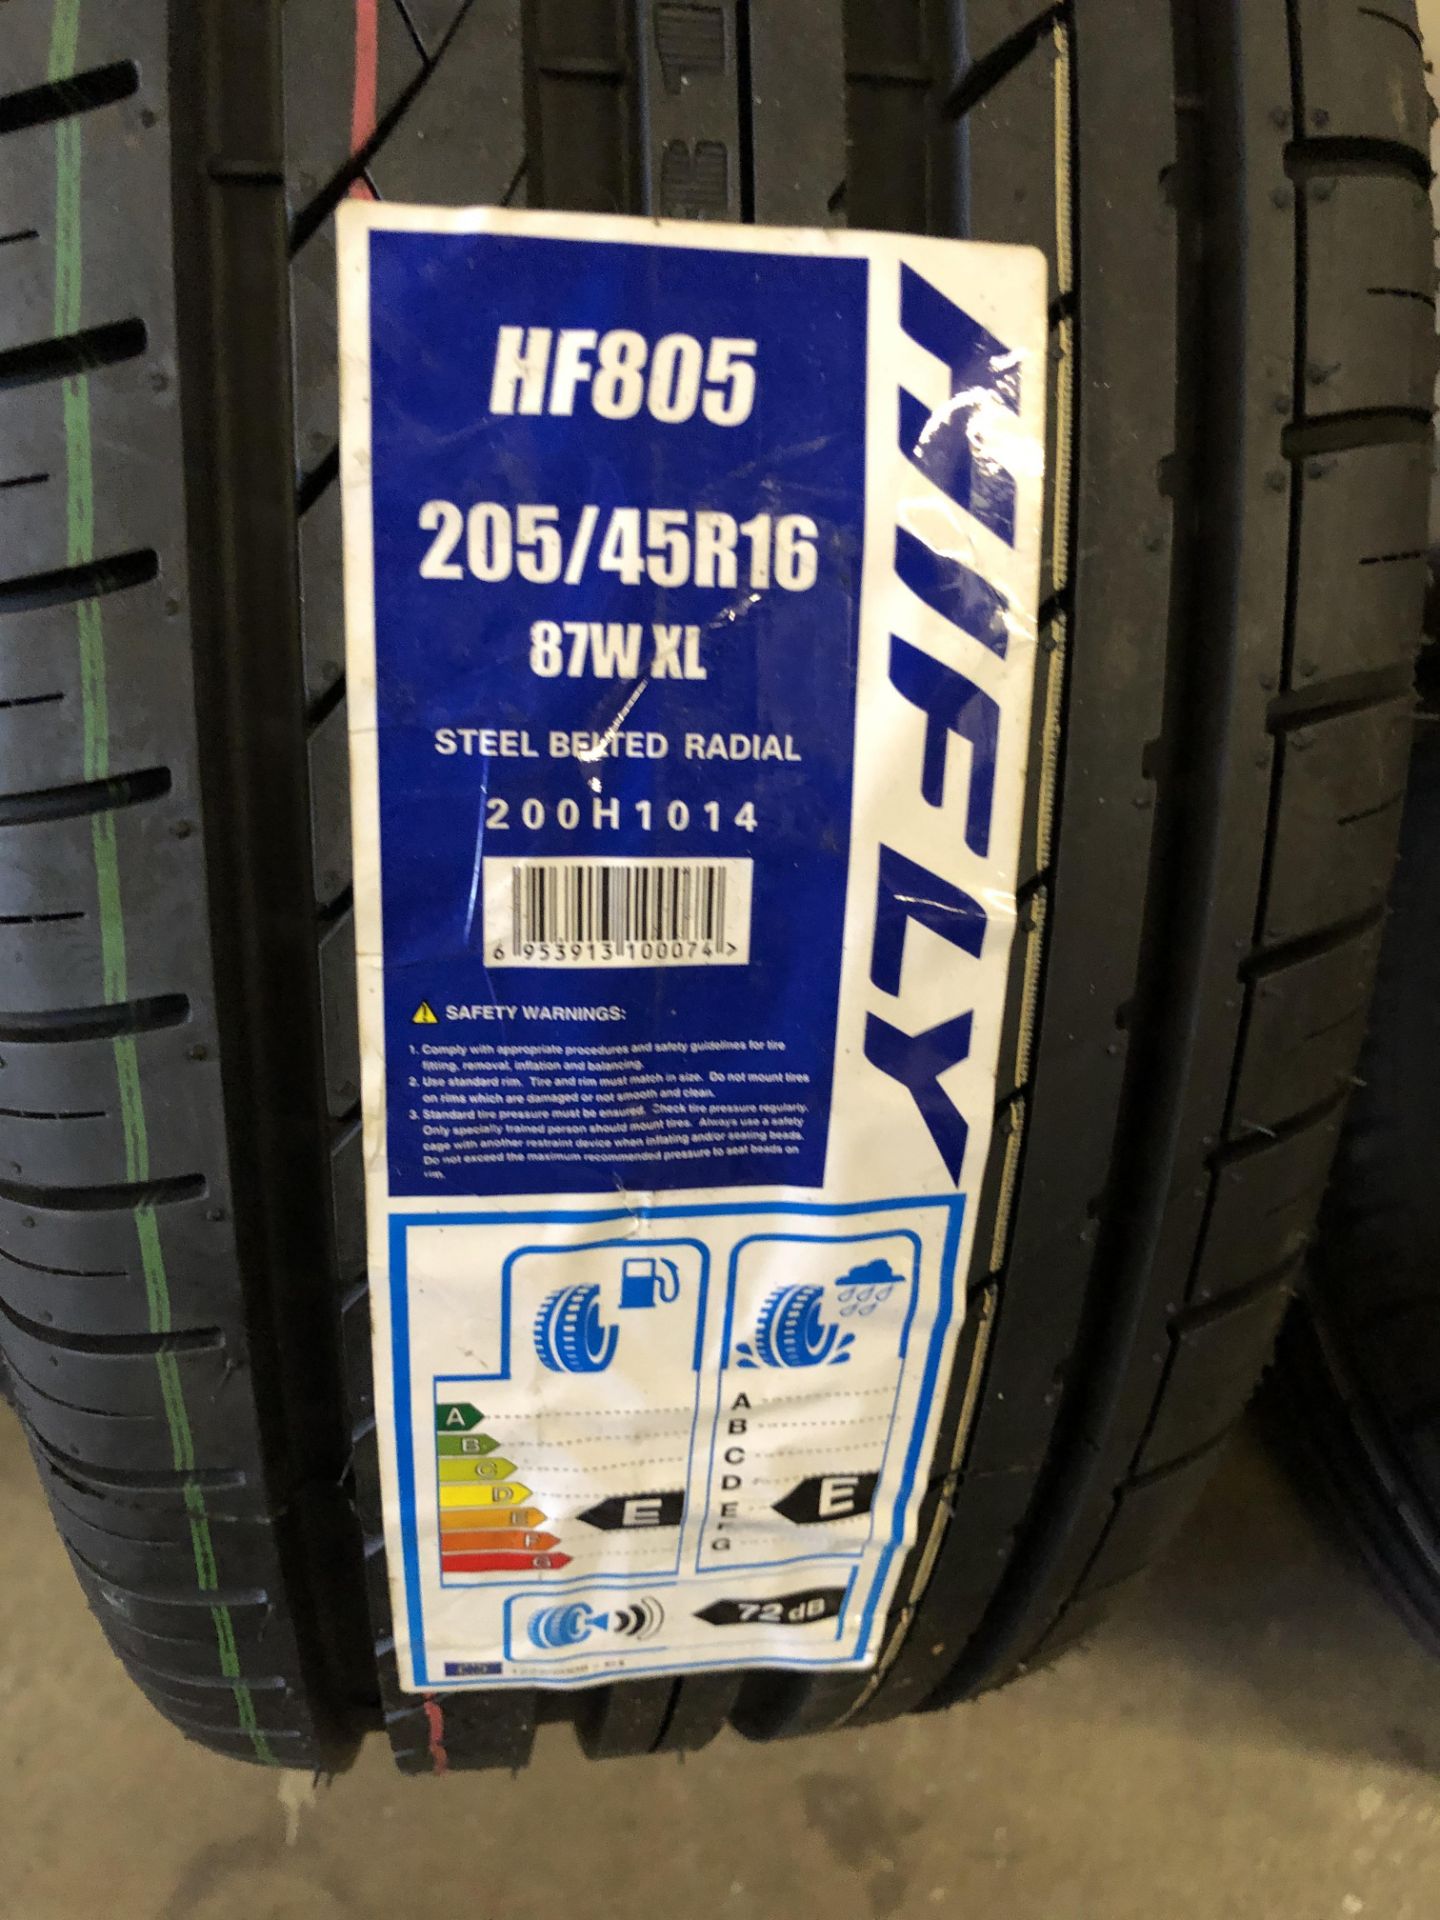 2: Hifly HF805 205/45R16 87W XL Steel Belted Radial Tyres (Please Note: Items located in